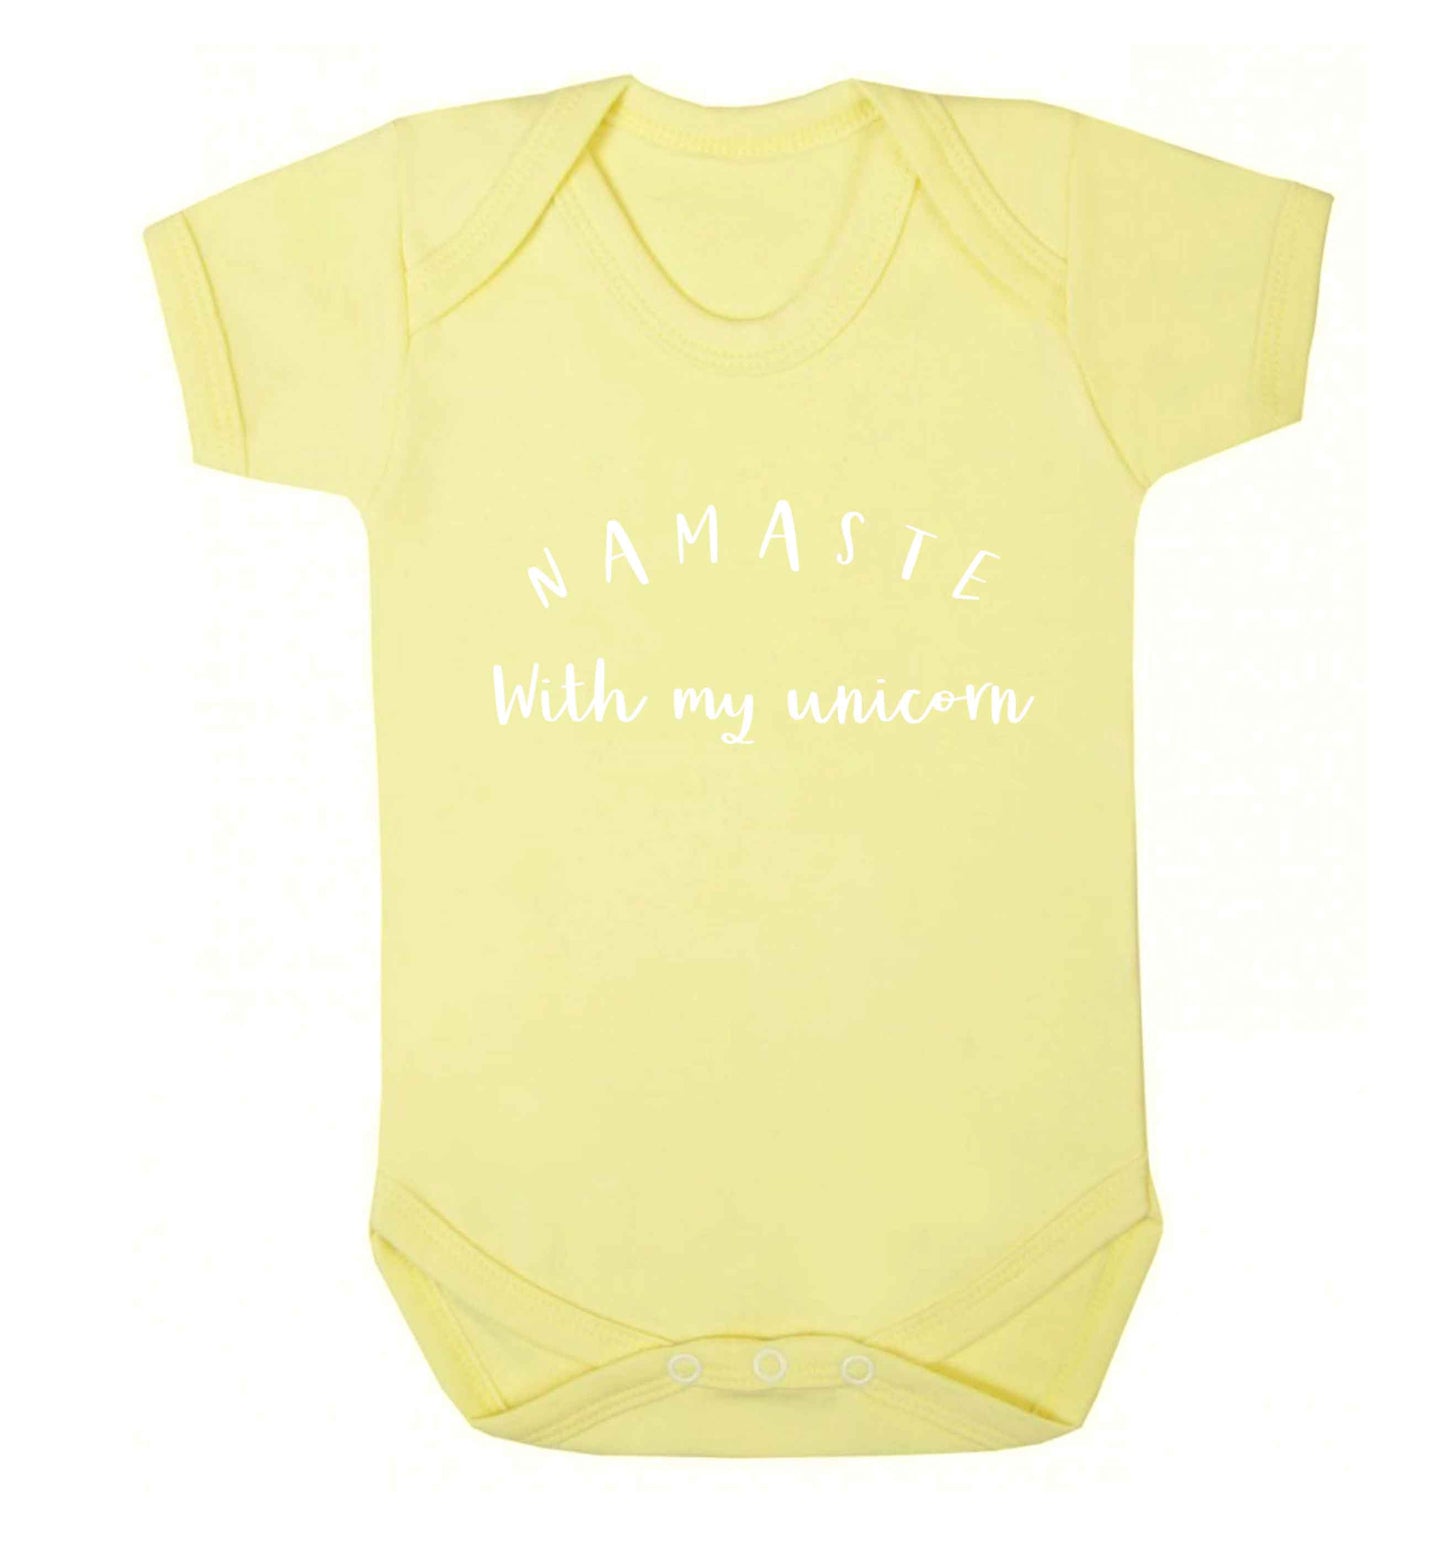 Namaste with my unicorn Baby Vest pale yellow 18-24 months